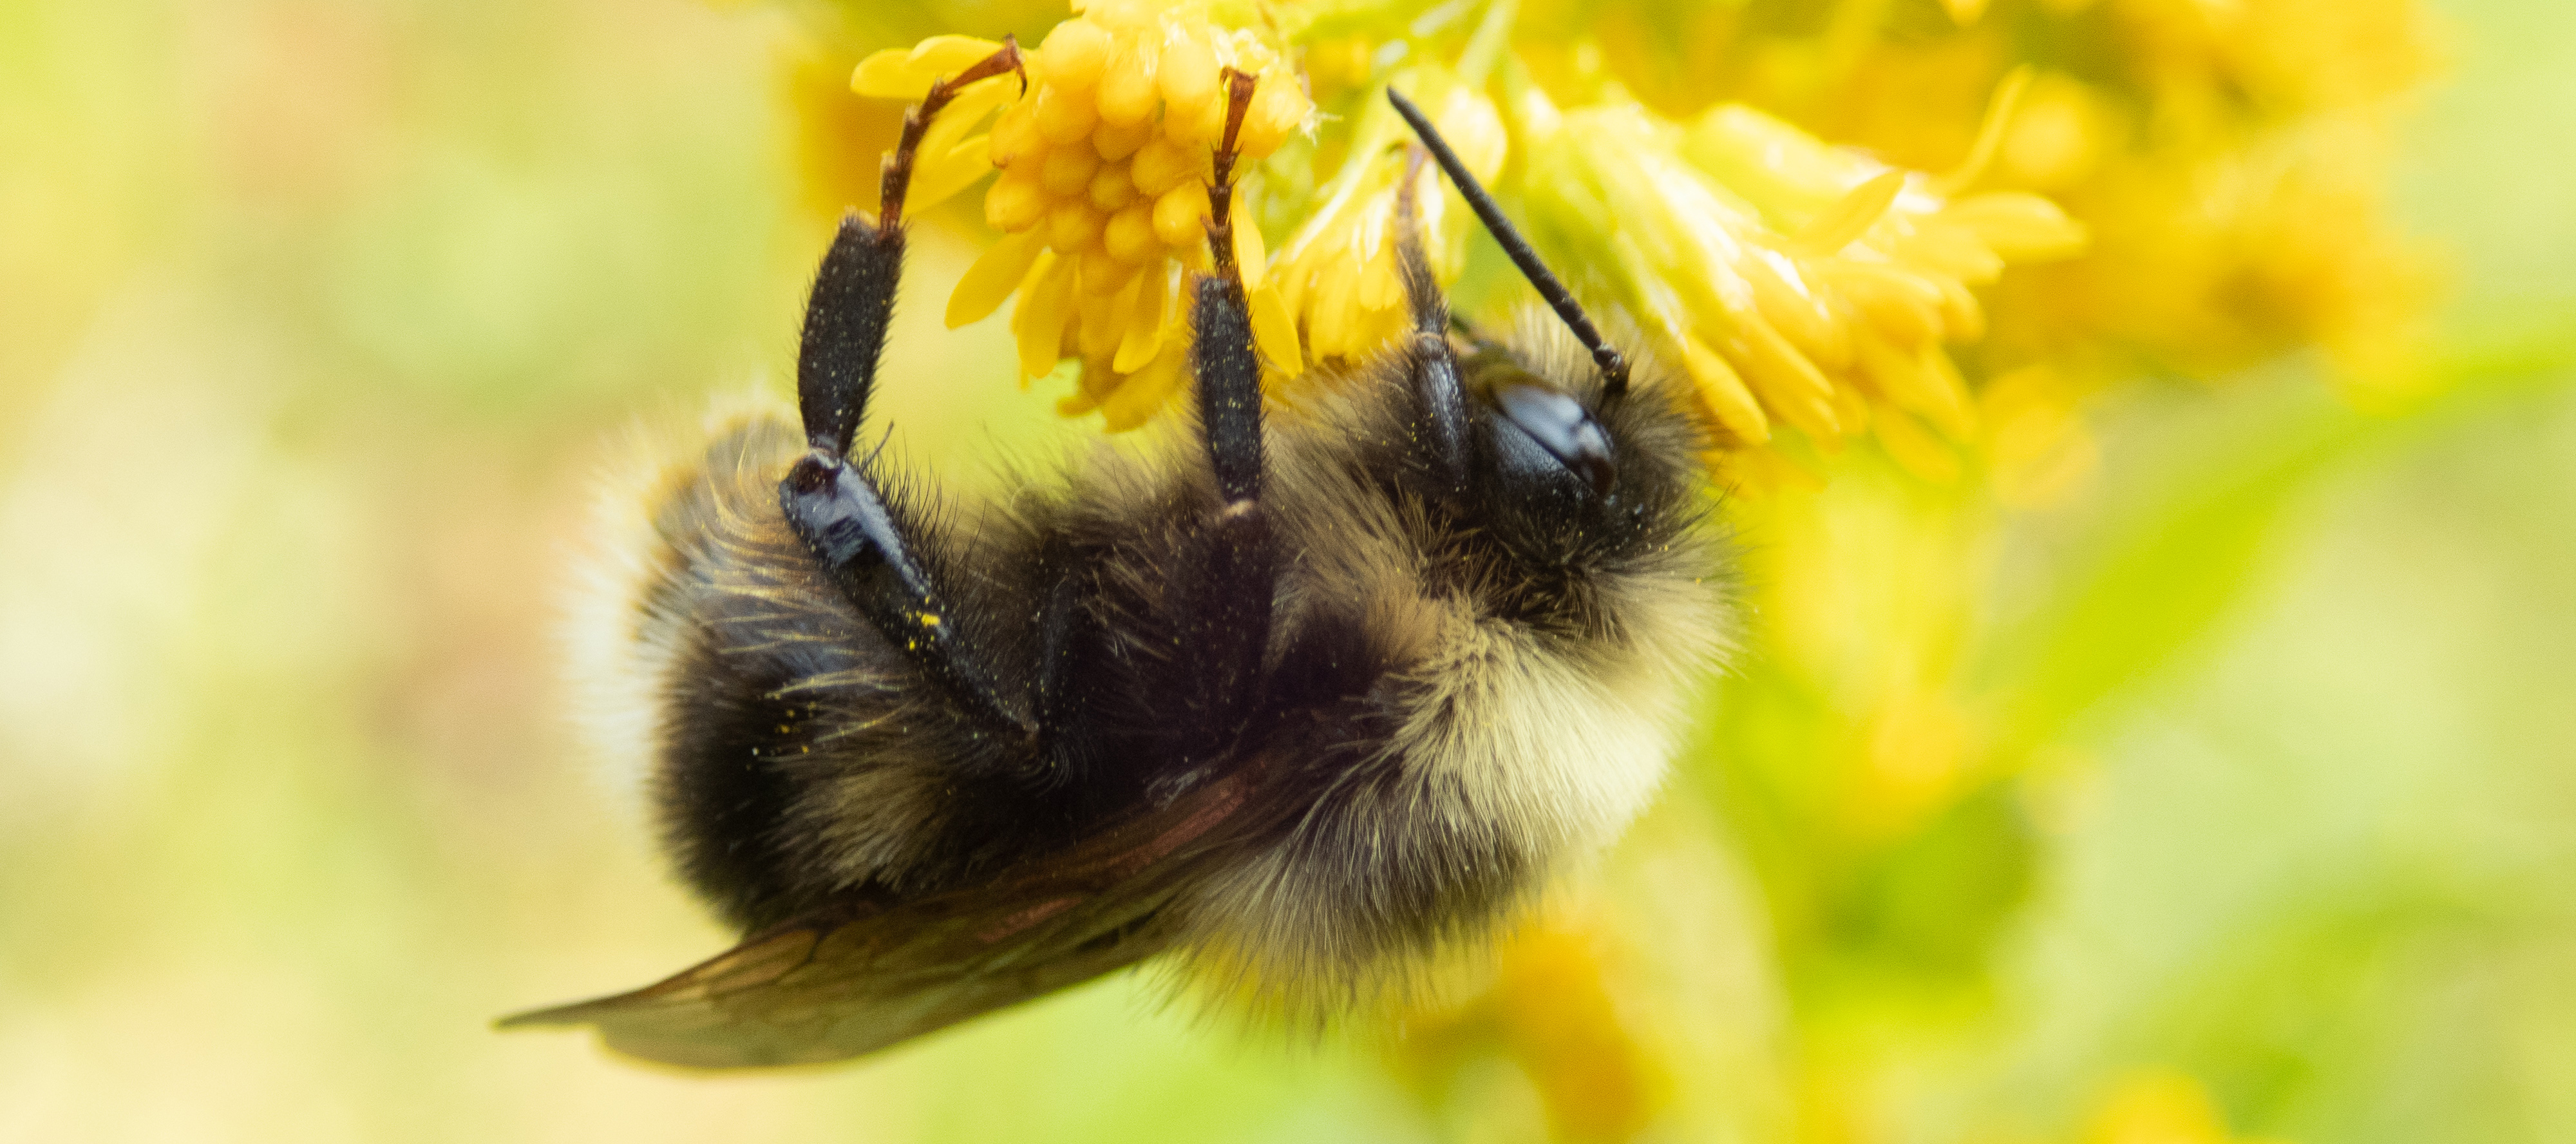 A western bumble bee (Bombus occidentalis) hangs upside down as it collects nectar from a yellow blossom.